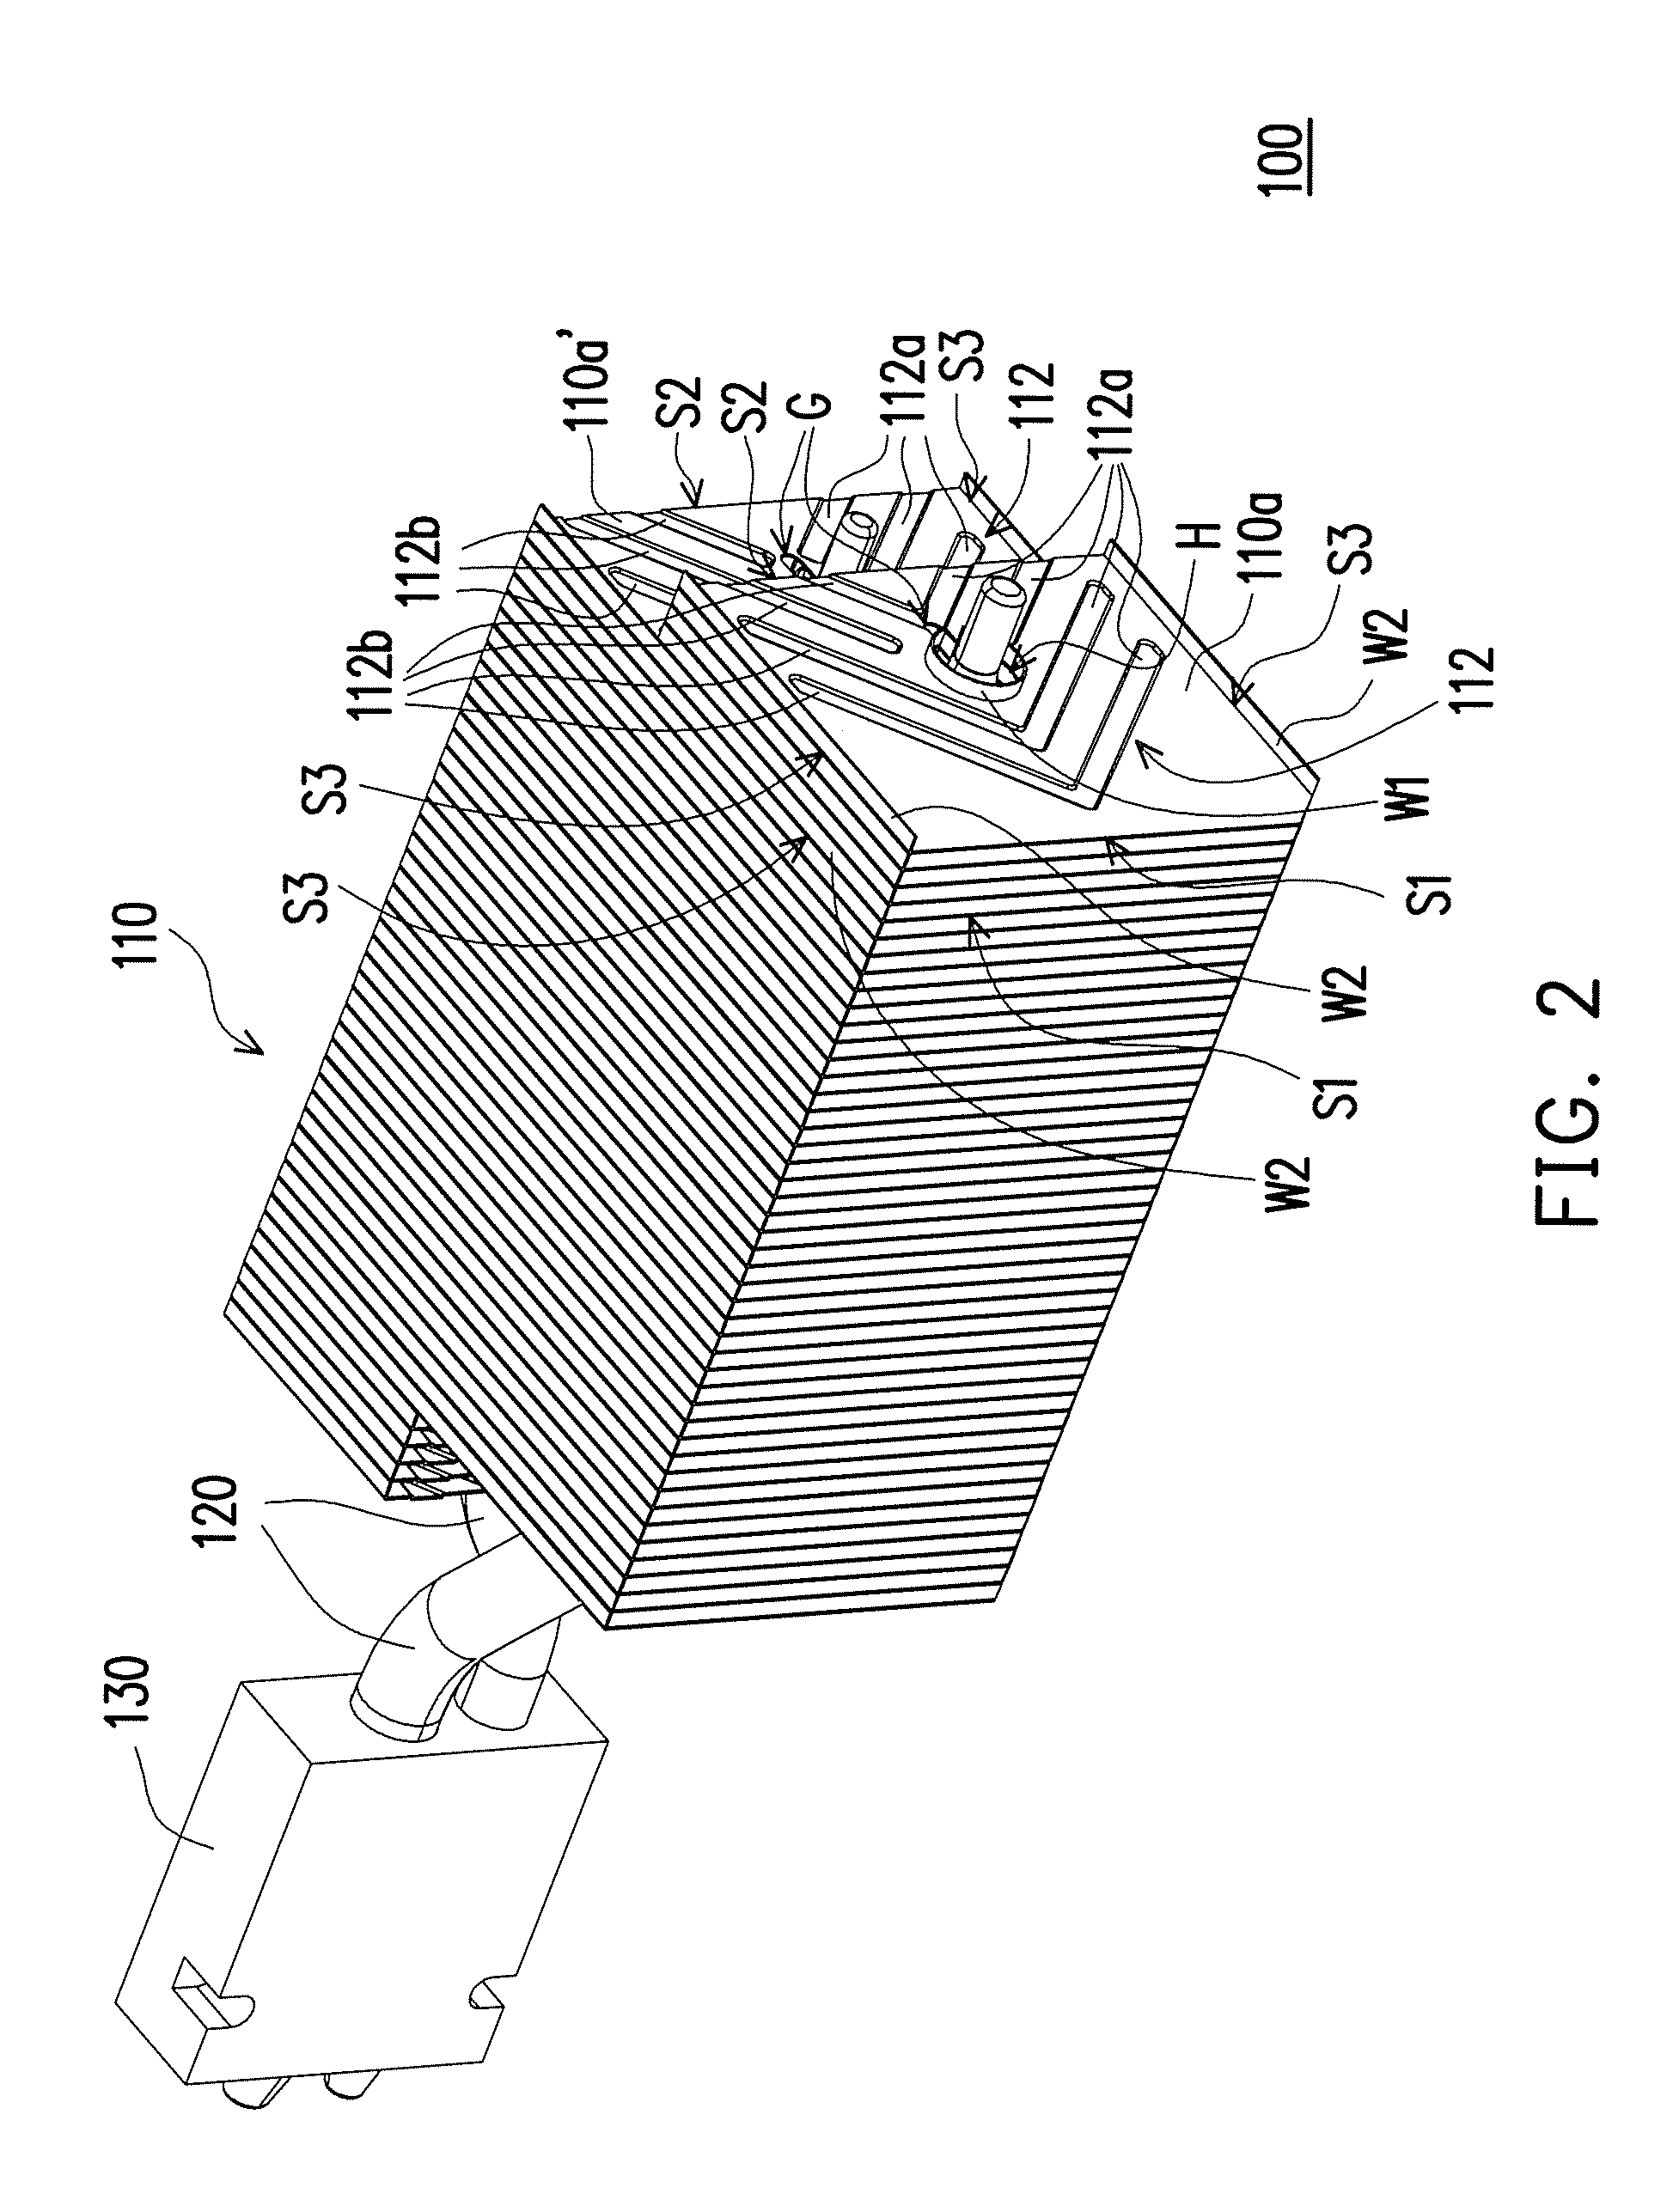 Heat dissipating module having turbulent structures